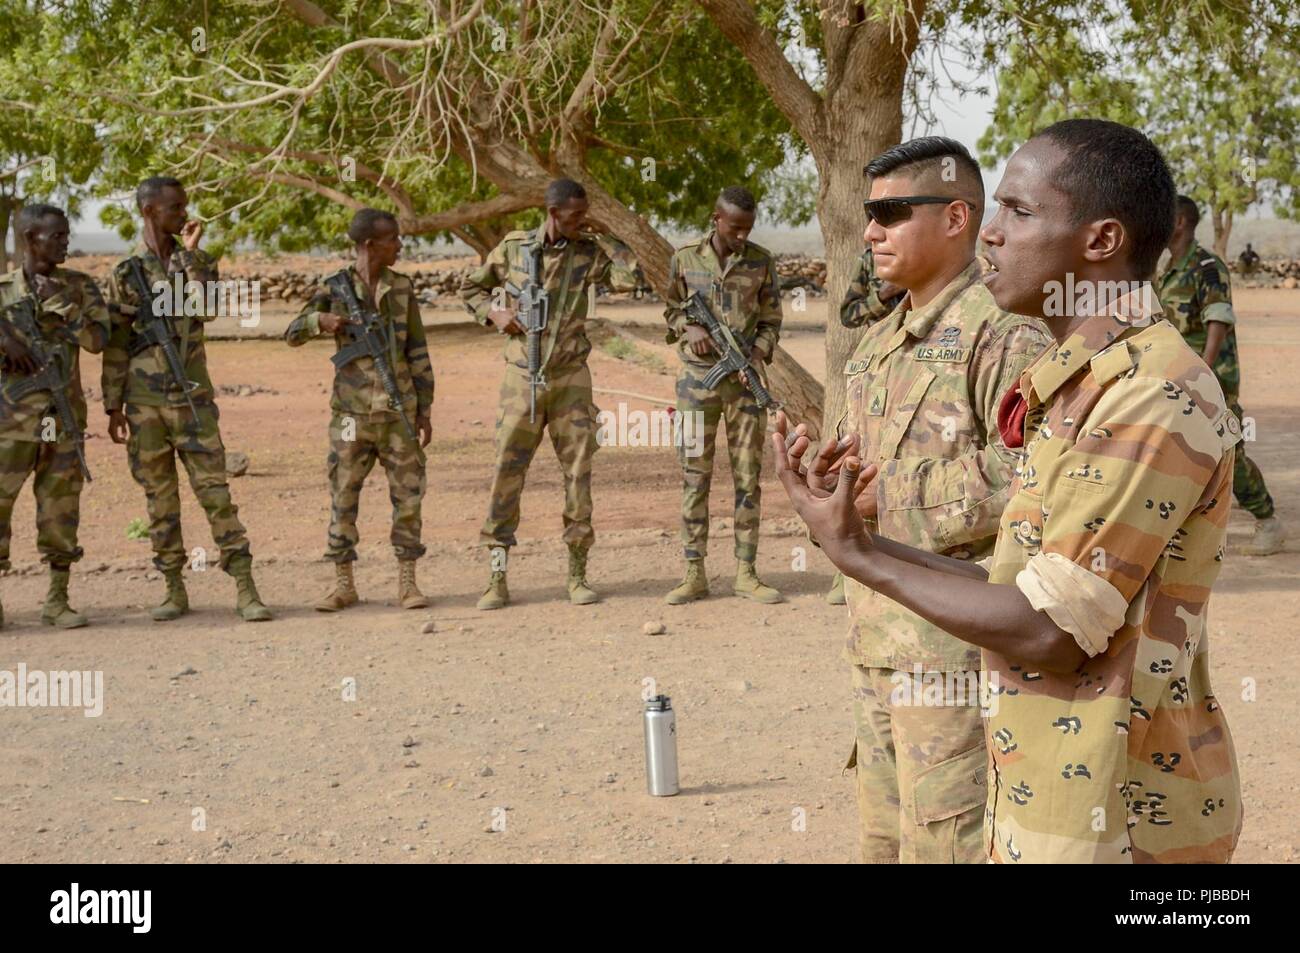 A non-commissioned officer with the Djiboutian Army’s Rapid Intervention Battalion (RIB) and U.S. Army Sergeant Daniel Martinez, Bravo Co., 1st Battalion, 141st Infantry Regiment, Texas National Guard, instruct new recruits at a training site outside Djibouti City, July 3, 2018. The RIB is a U.S. Army trained unit that was formed to respond to crises and promote regional security and stability in East Africa. Stock Photo